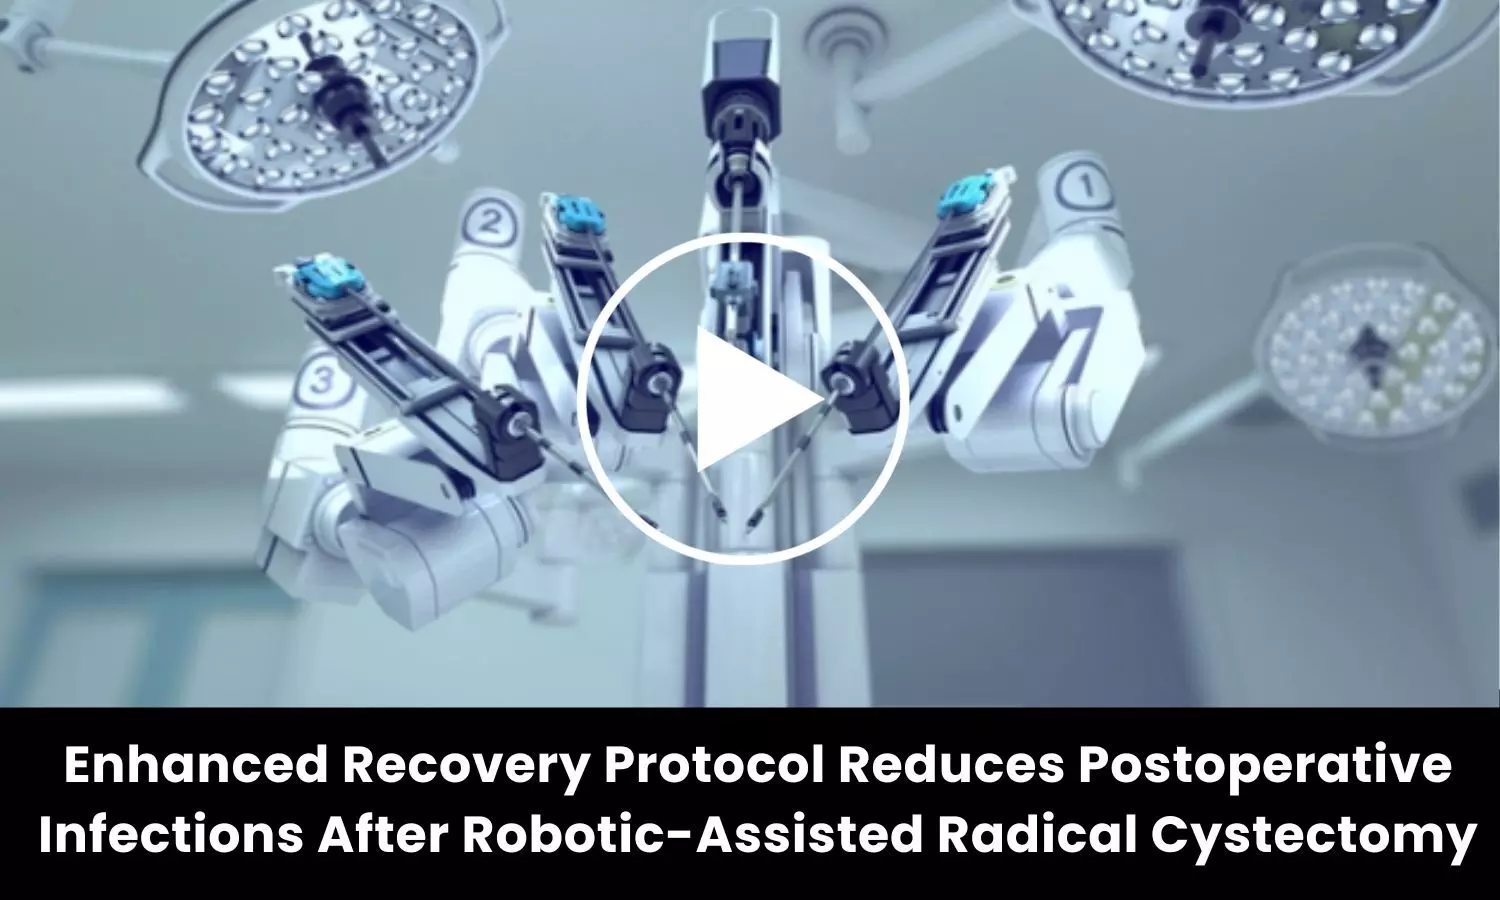 Enhanced Recovery Protocol Reduces Postoperative Infections After Robotic-Assisted Radical Cystectomy